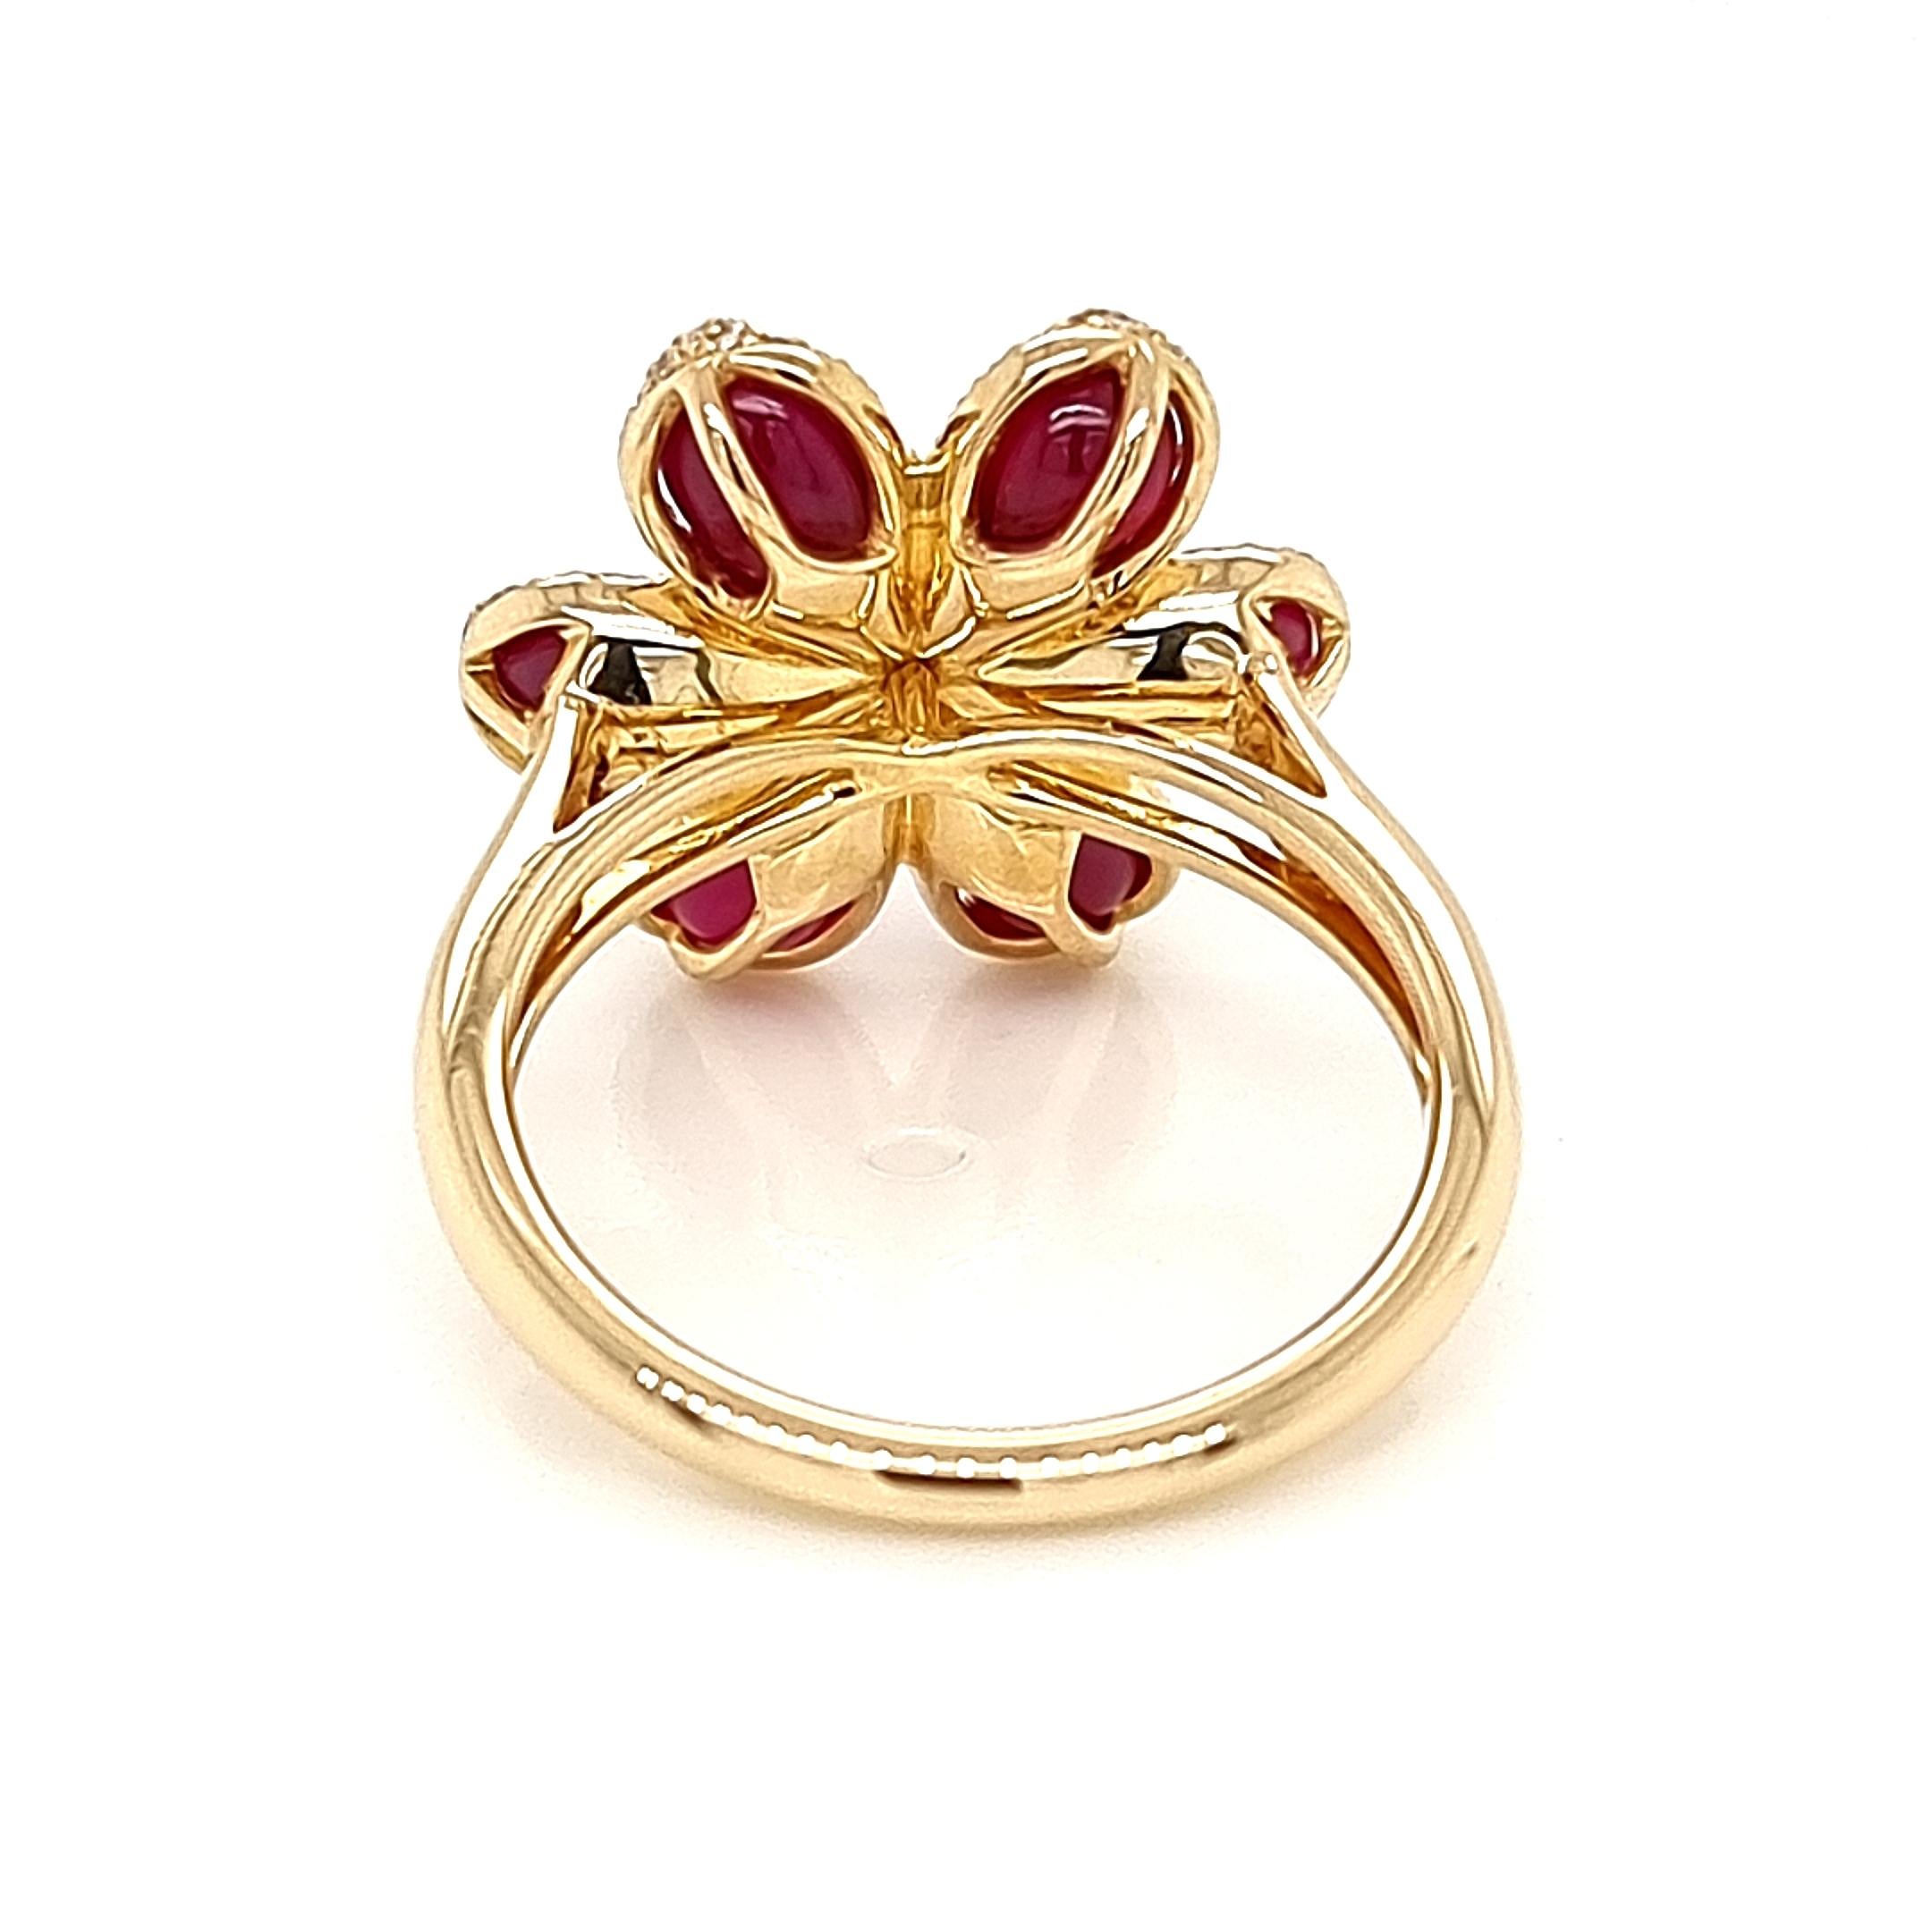 Women's Yellow 18K Ring with White Diamonds and Rubies Flower Theme For Sale